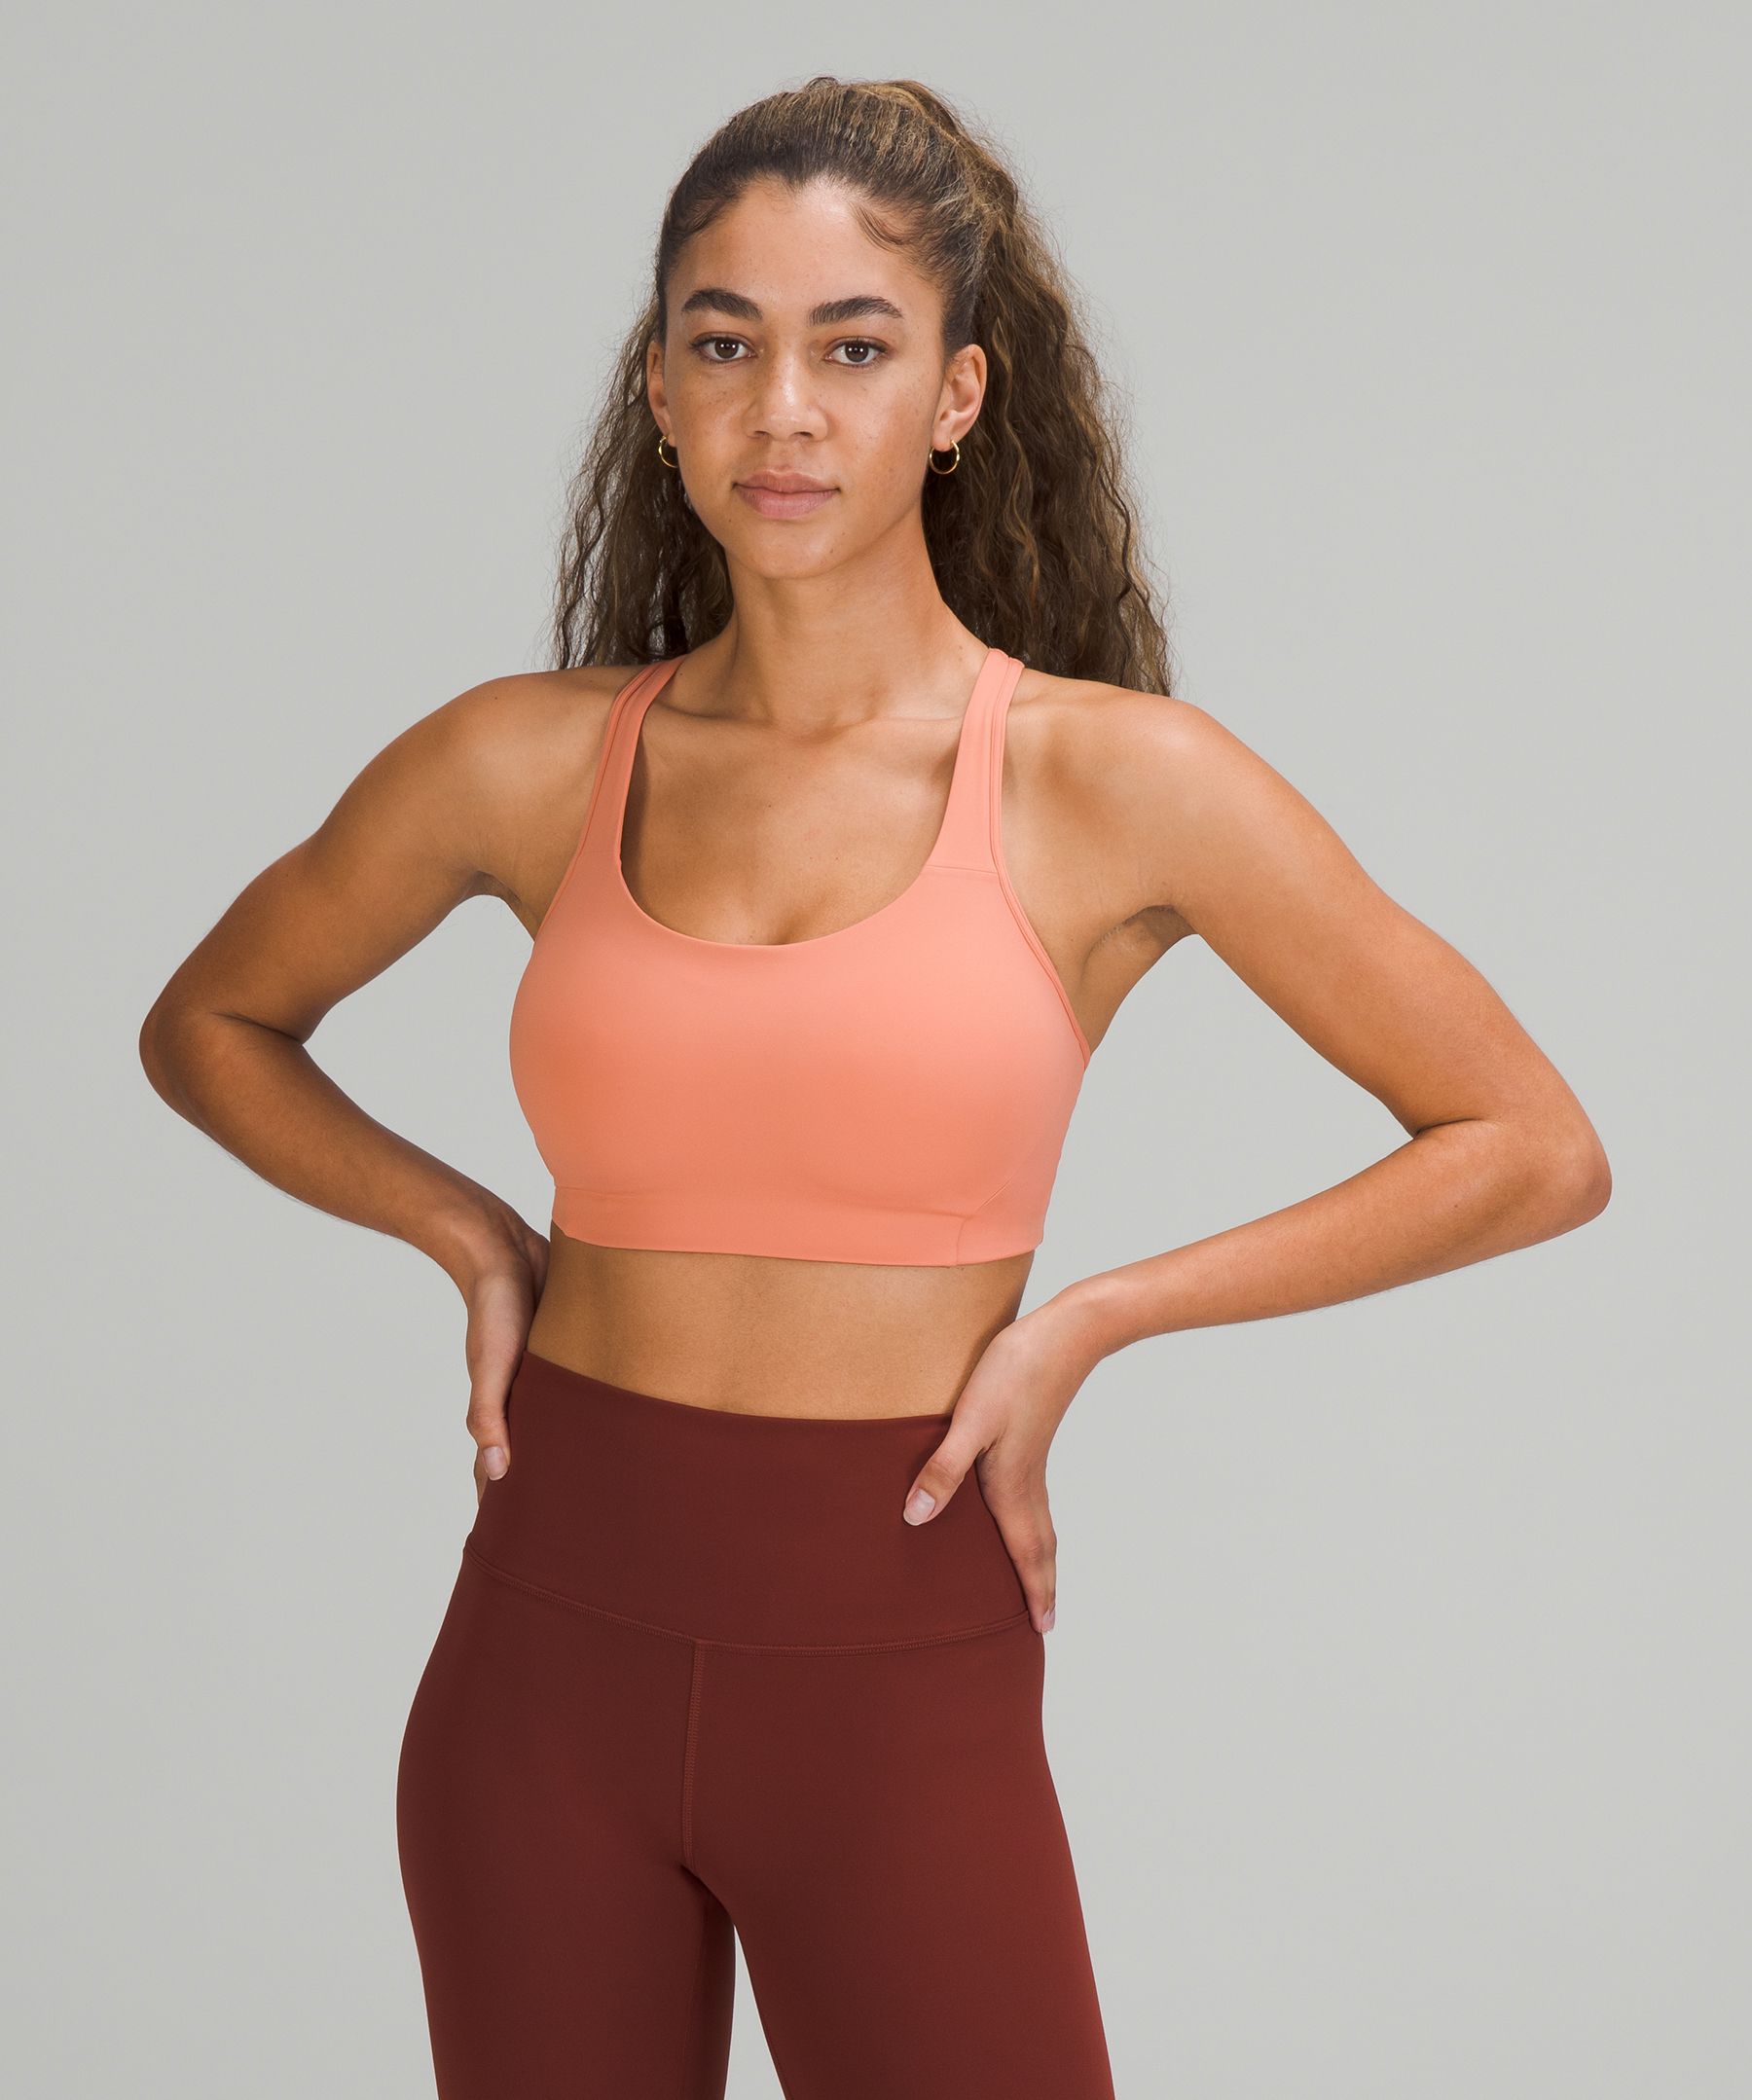 Lululemon All Sport Bra - Toothpaste - Supportive and Stylish